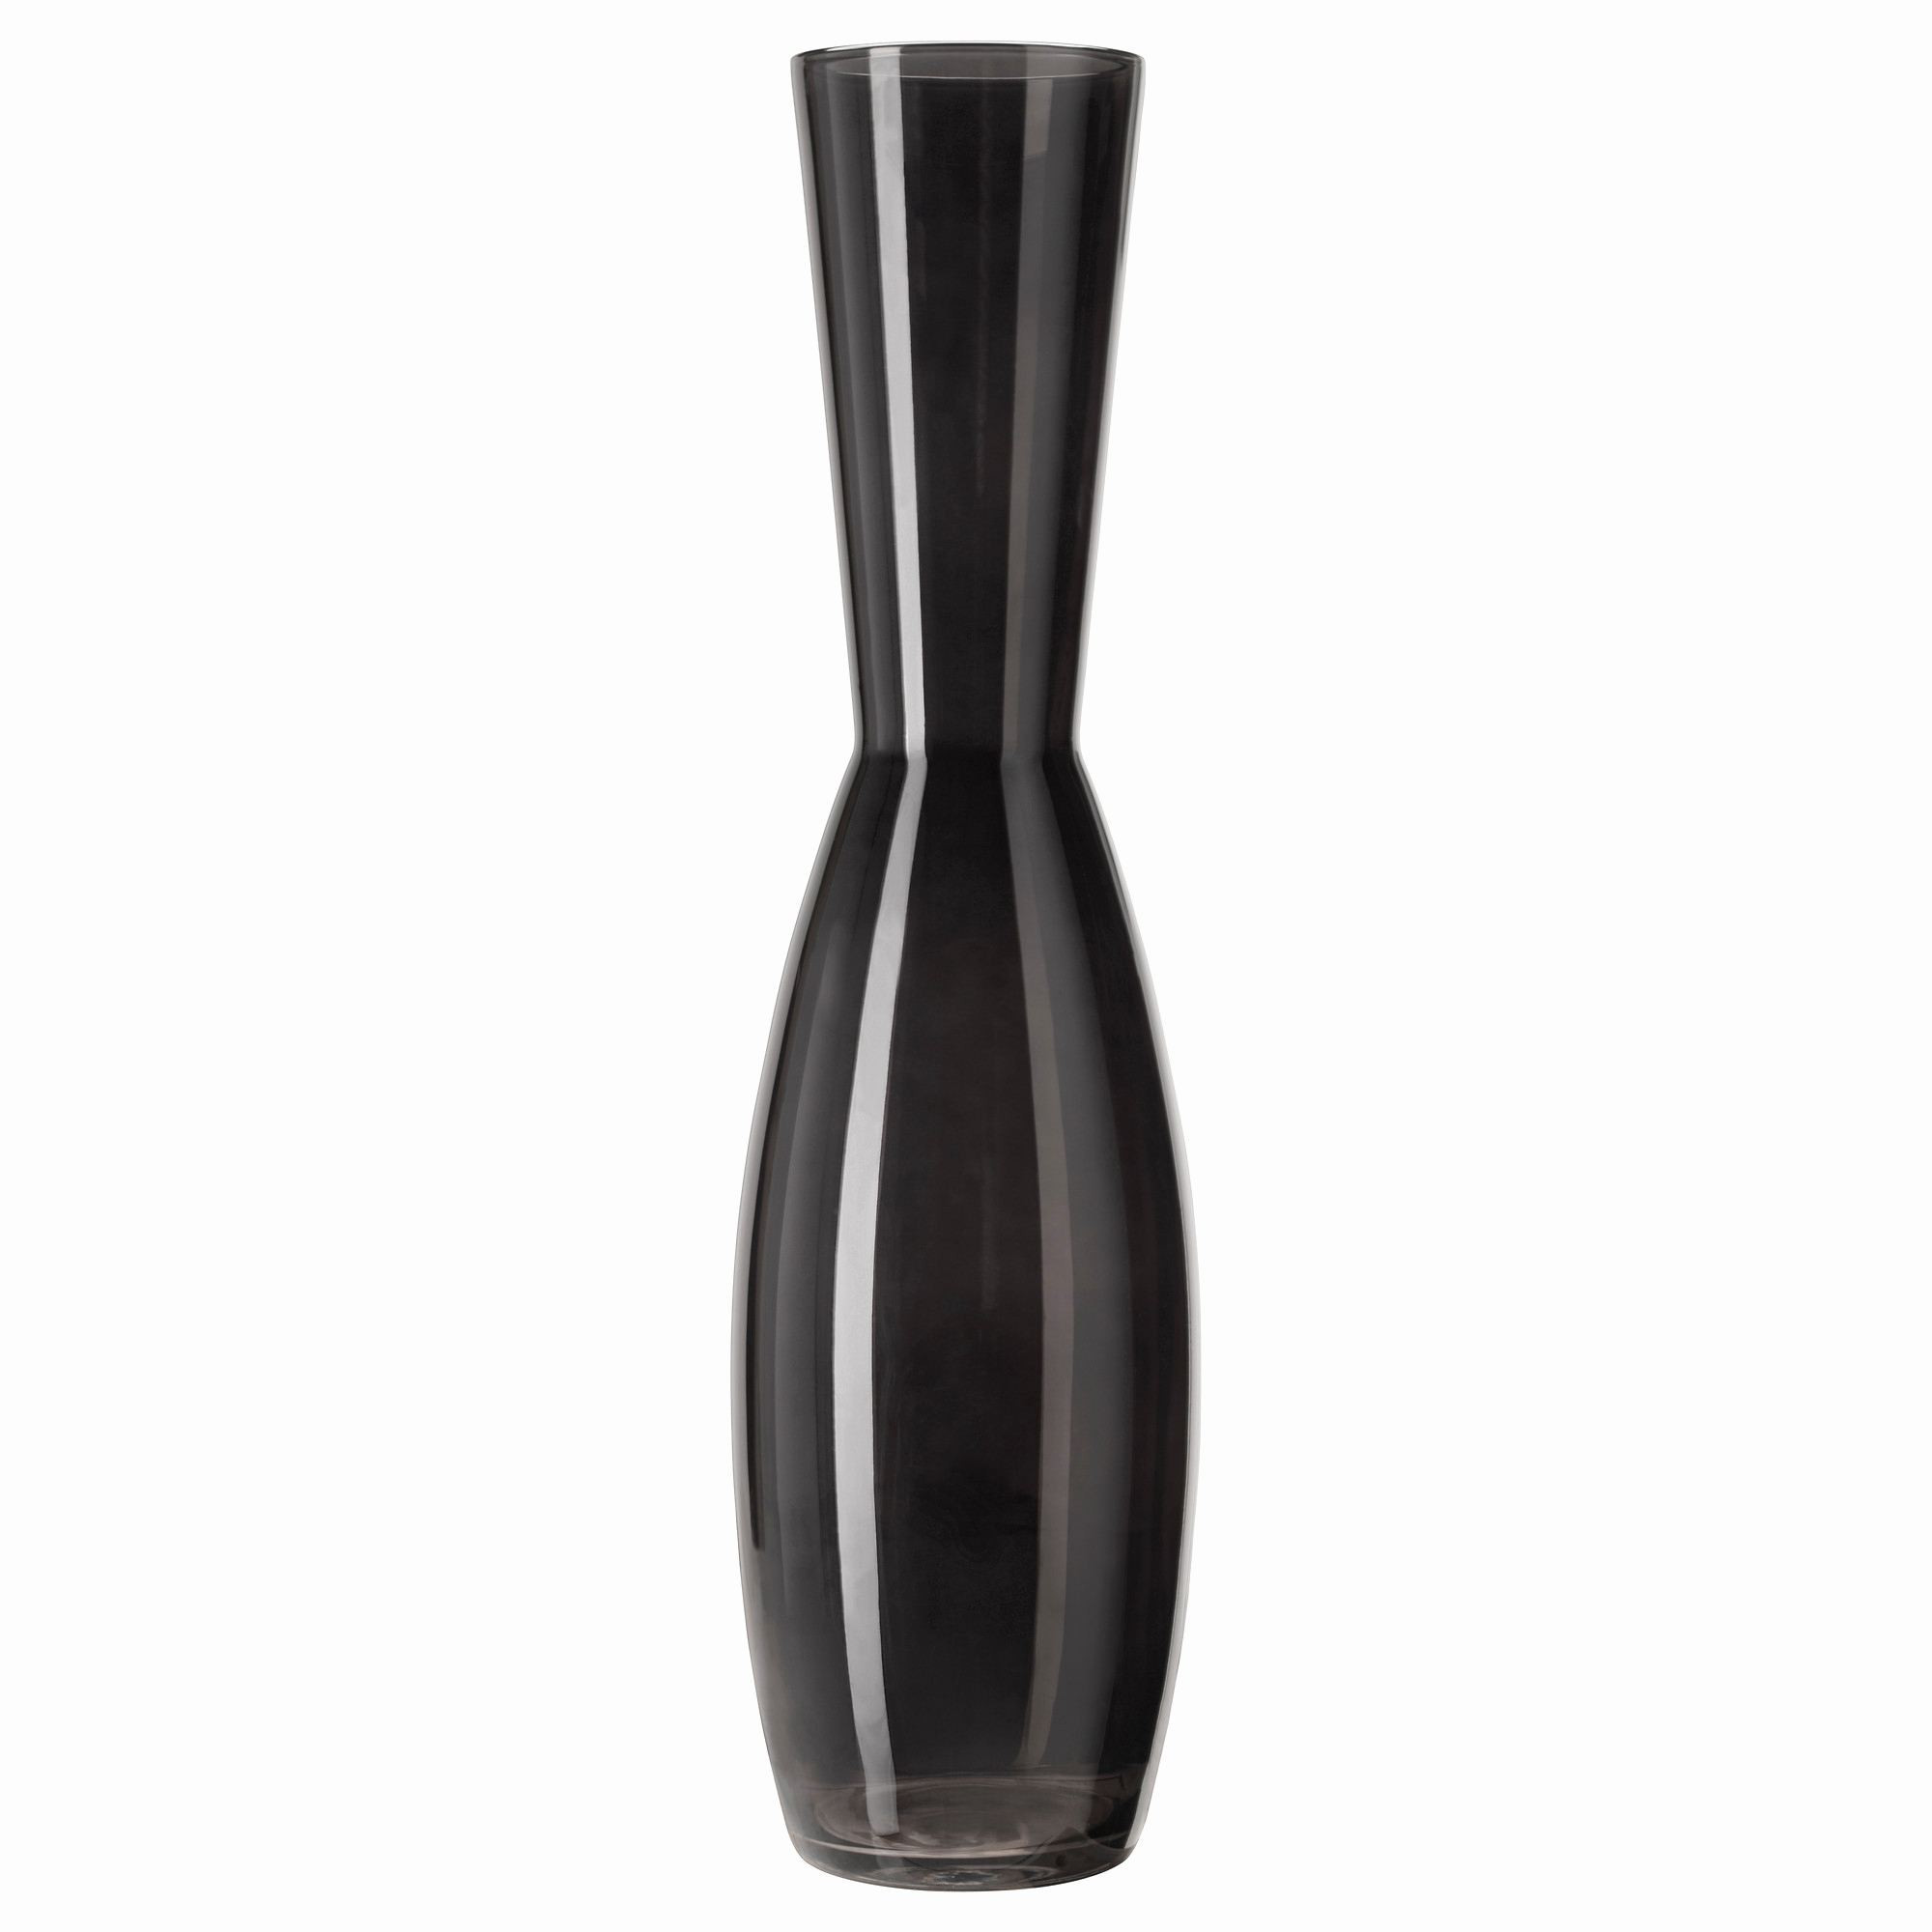 29 Ideal Tall Brown Floor Vases 2024 free download tall brown floor vases of floor vase lovely ikea krabb mirror ideas awesome pe s5h vases ikea throughout floor vase lovely ikea krabb mirror ideas awesome pe s5h vases ikea floor vase i 0d